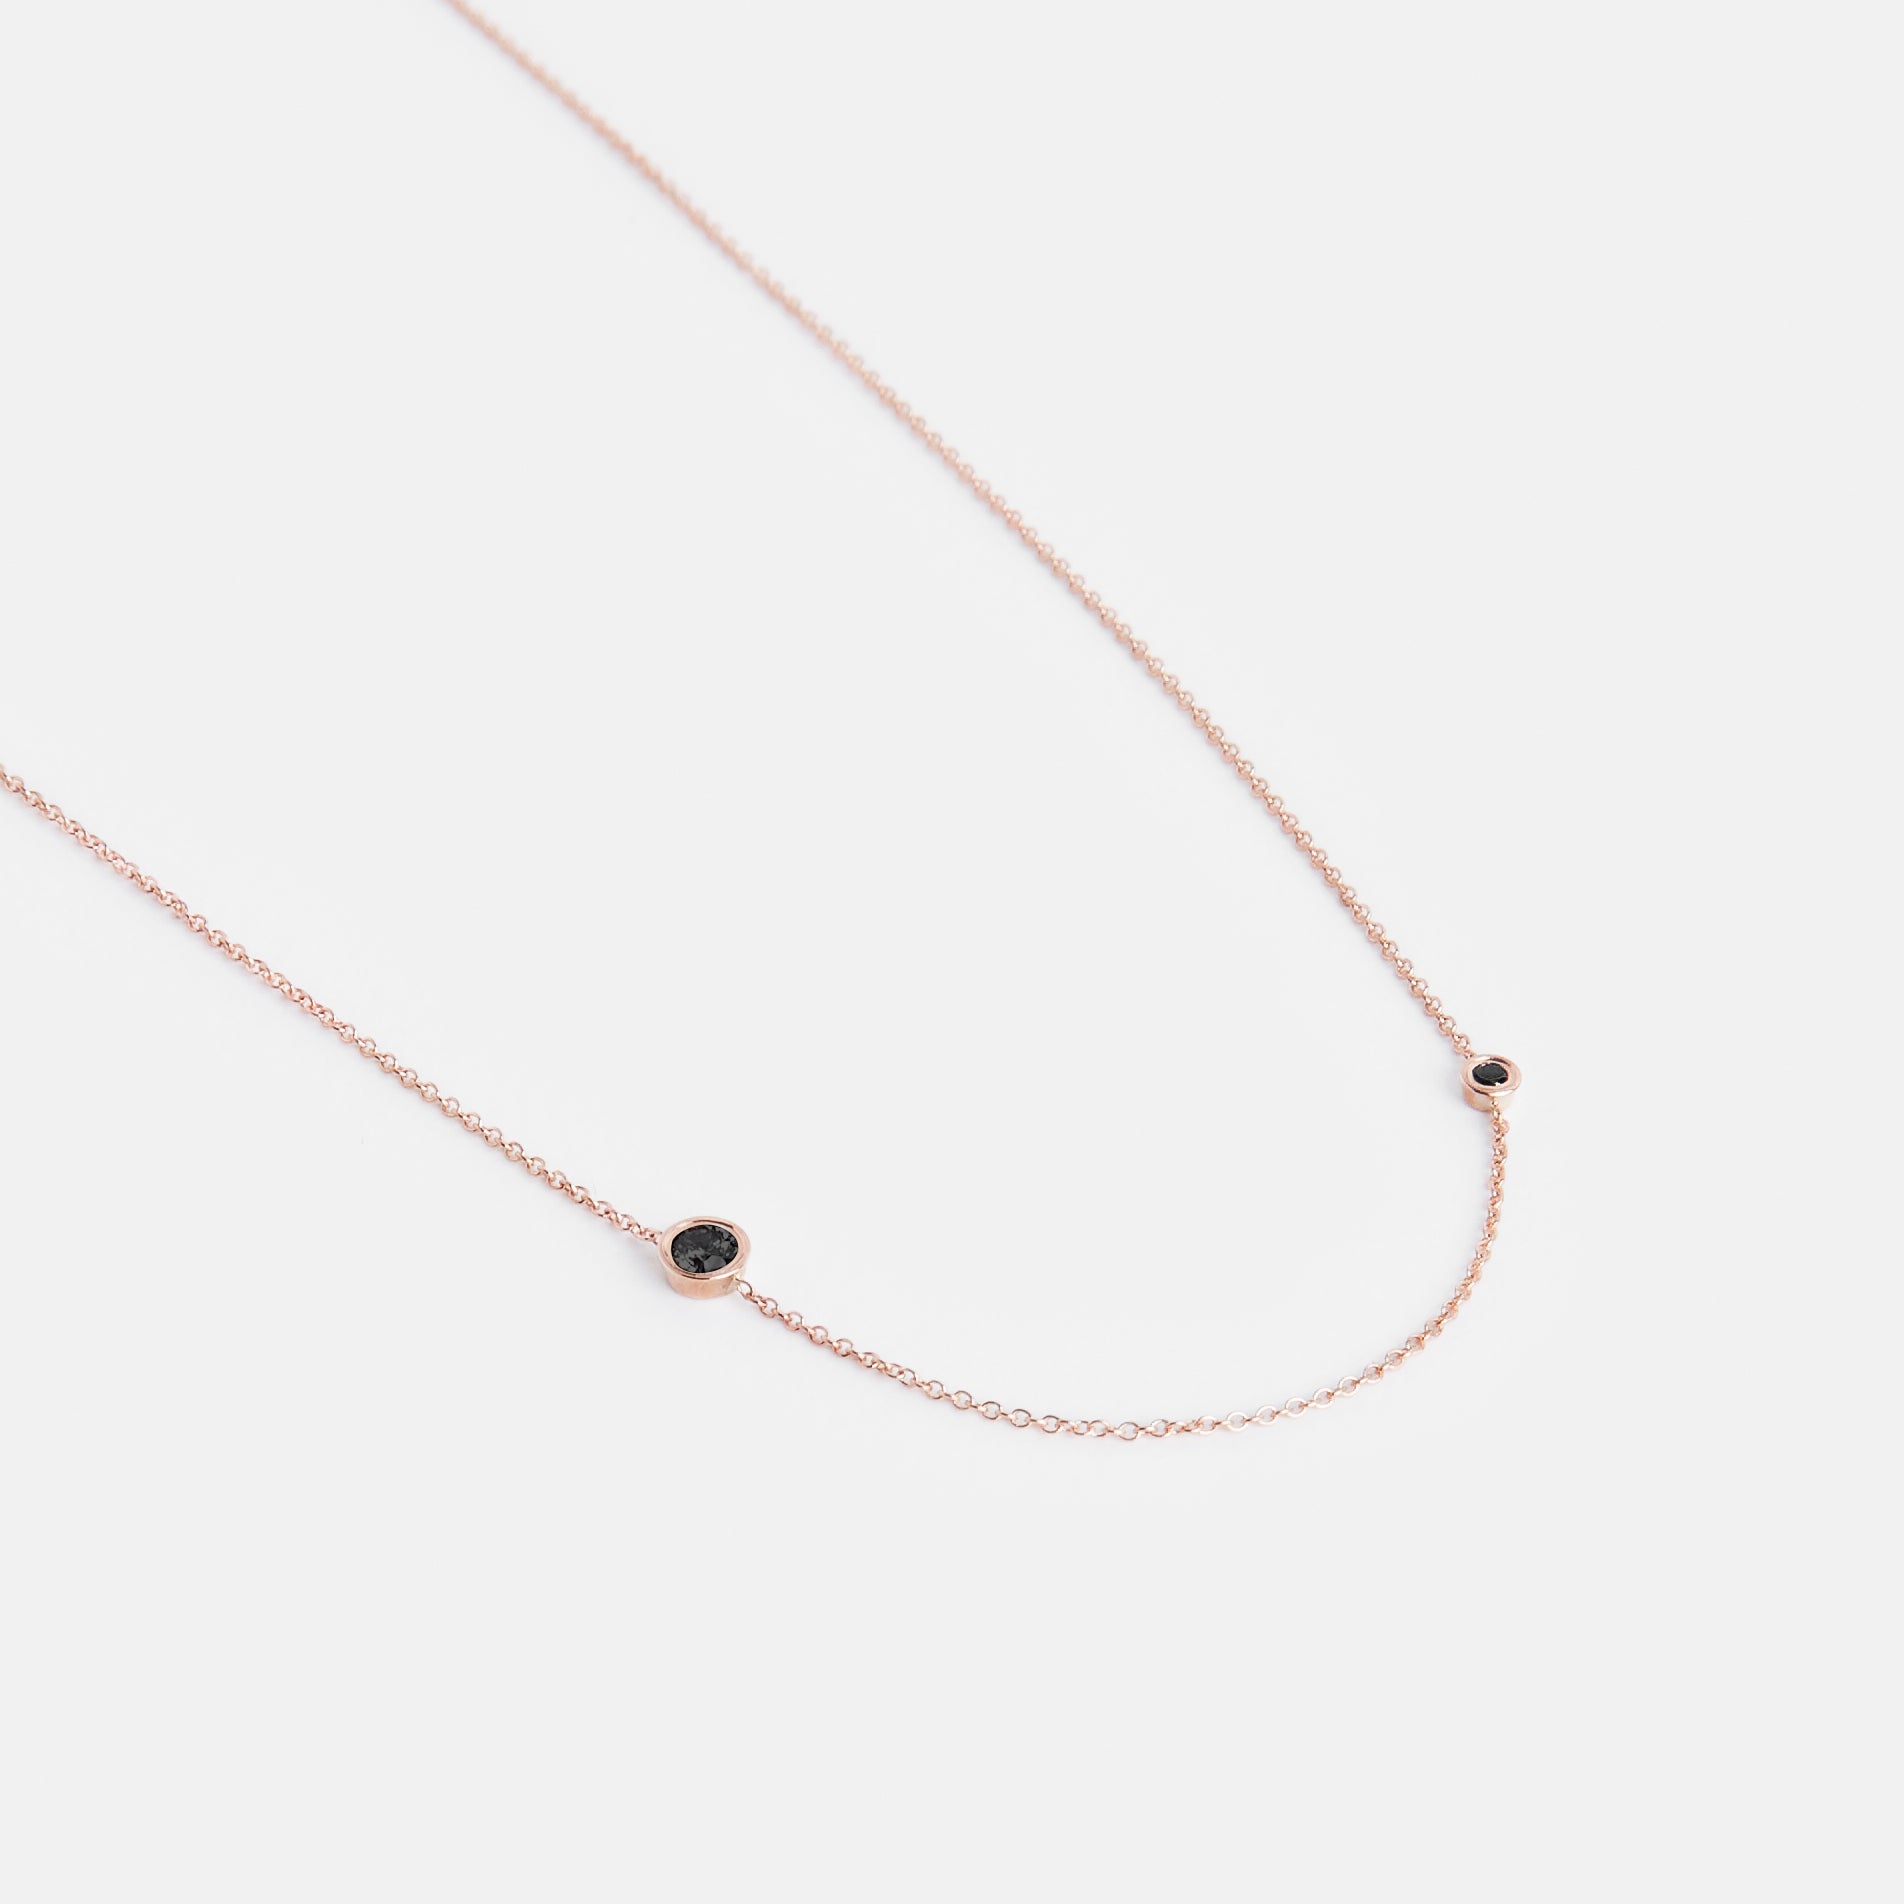 Iba Designer Necklace in 14k Rose Gold set with Black Diamonds By SHW Fine Jewelry NYC